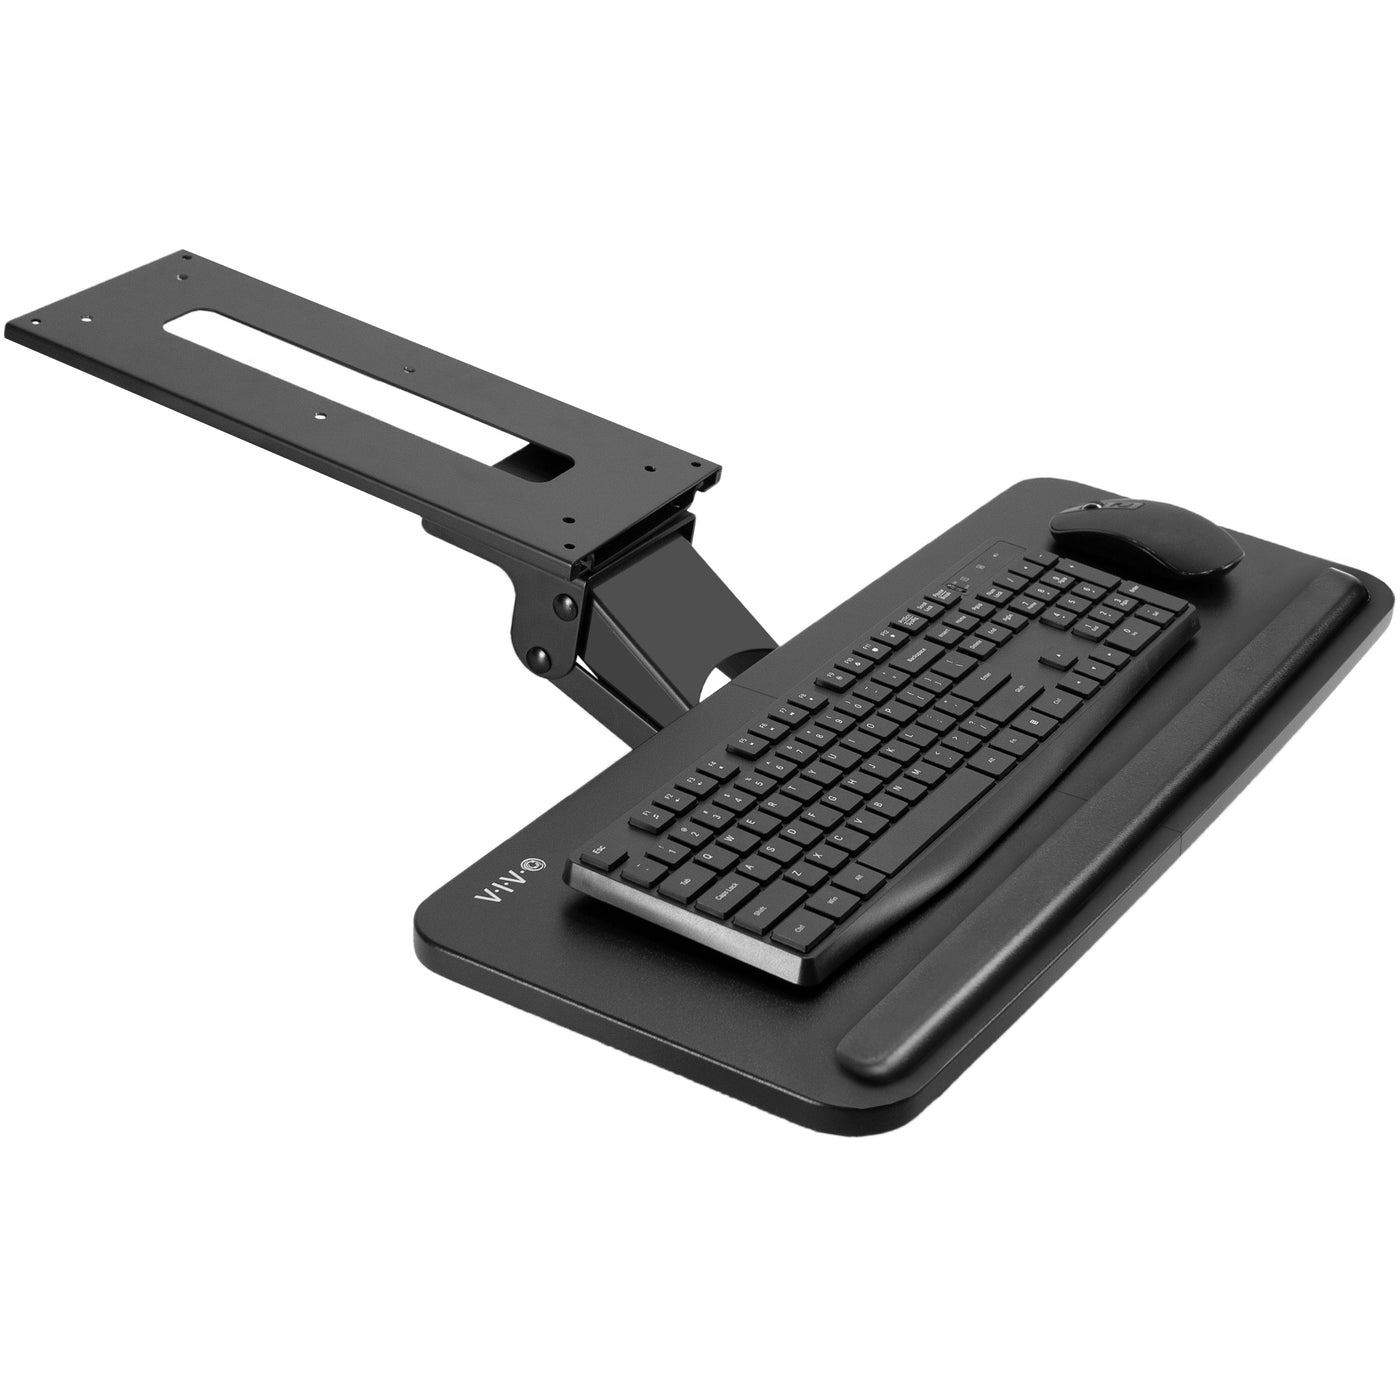 Ergo-Comfort Sit/Stand Articulating Keyboard/Mouse Arm